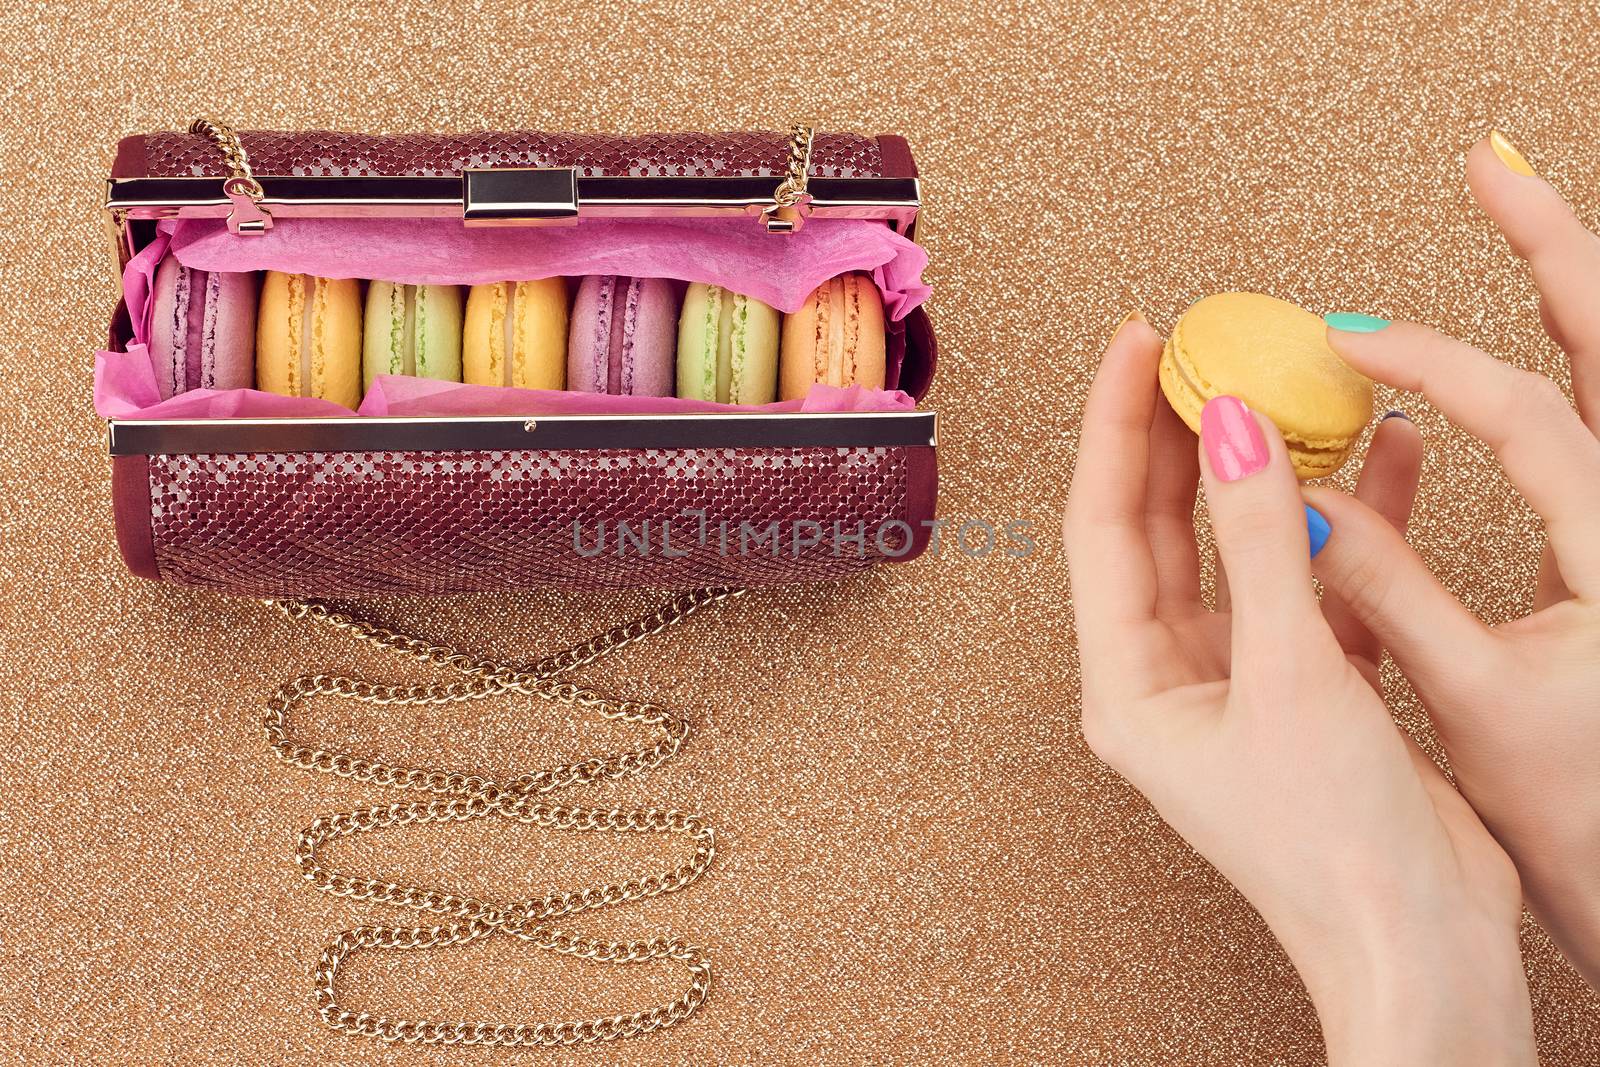 Macarons french in handbag, woman hands. Luxury shiny glamor fashion clutch. Sweet colorful dessert. Unusual creative art, gold party background, bokeh, copyspase. Vintage